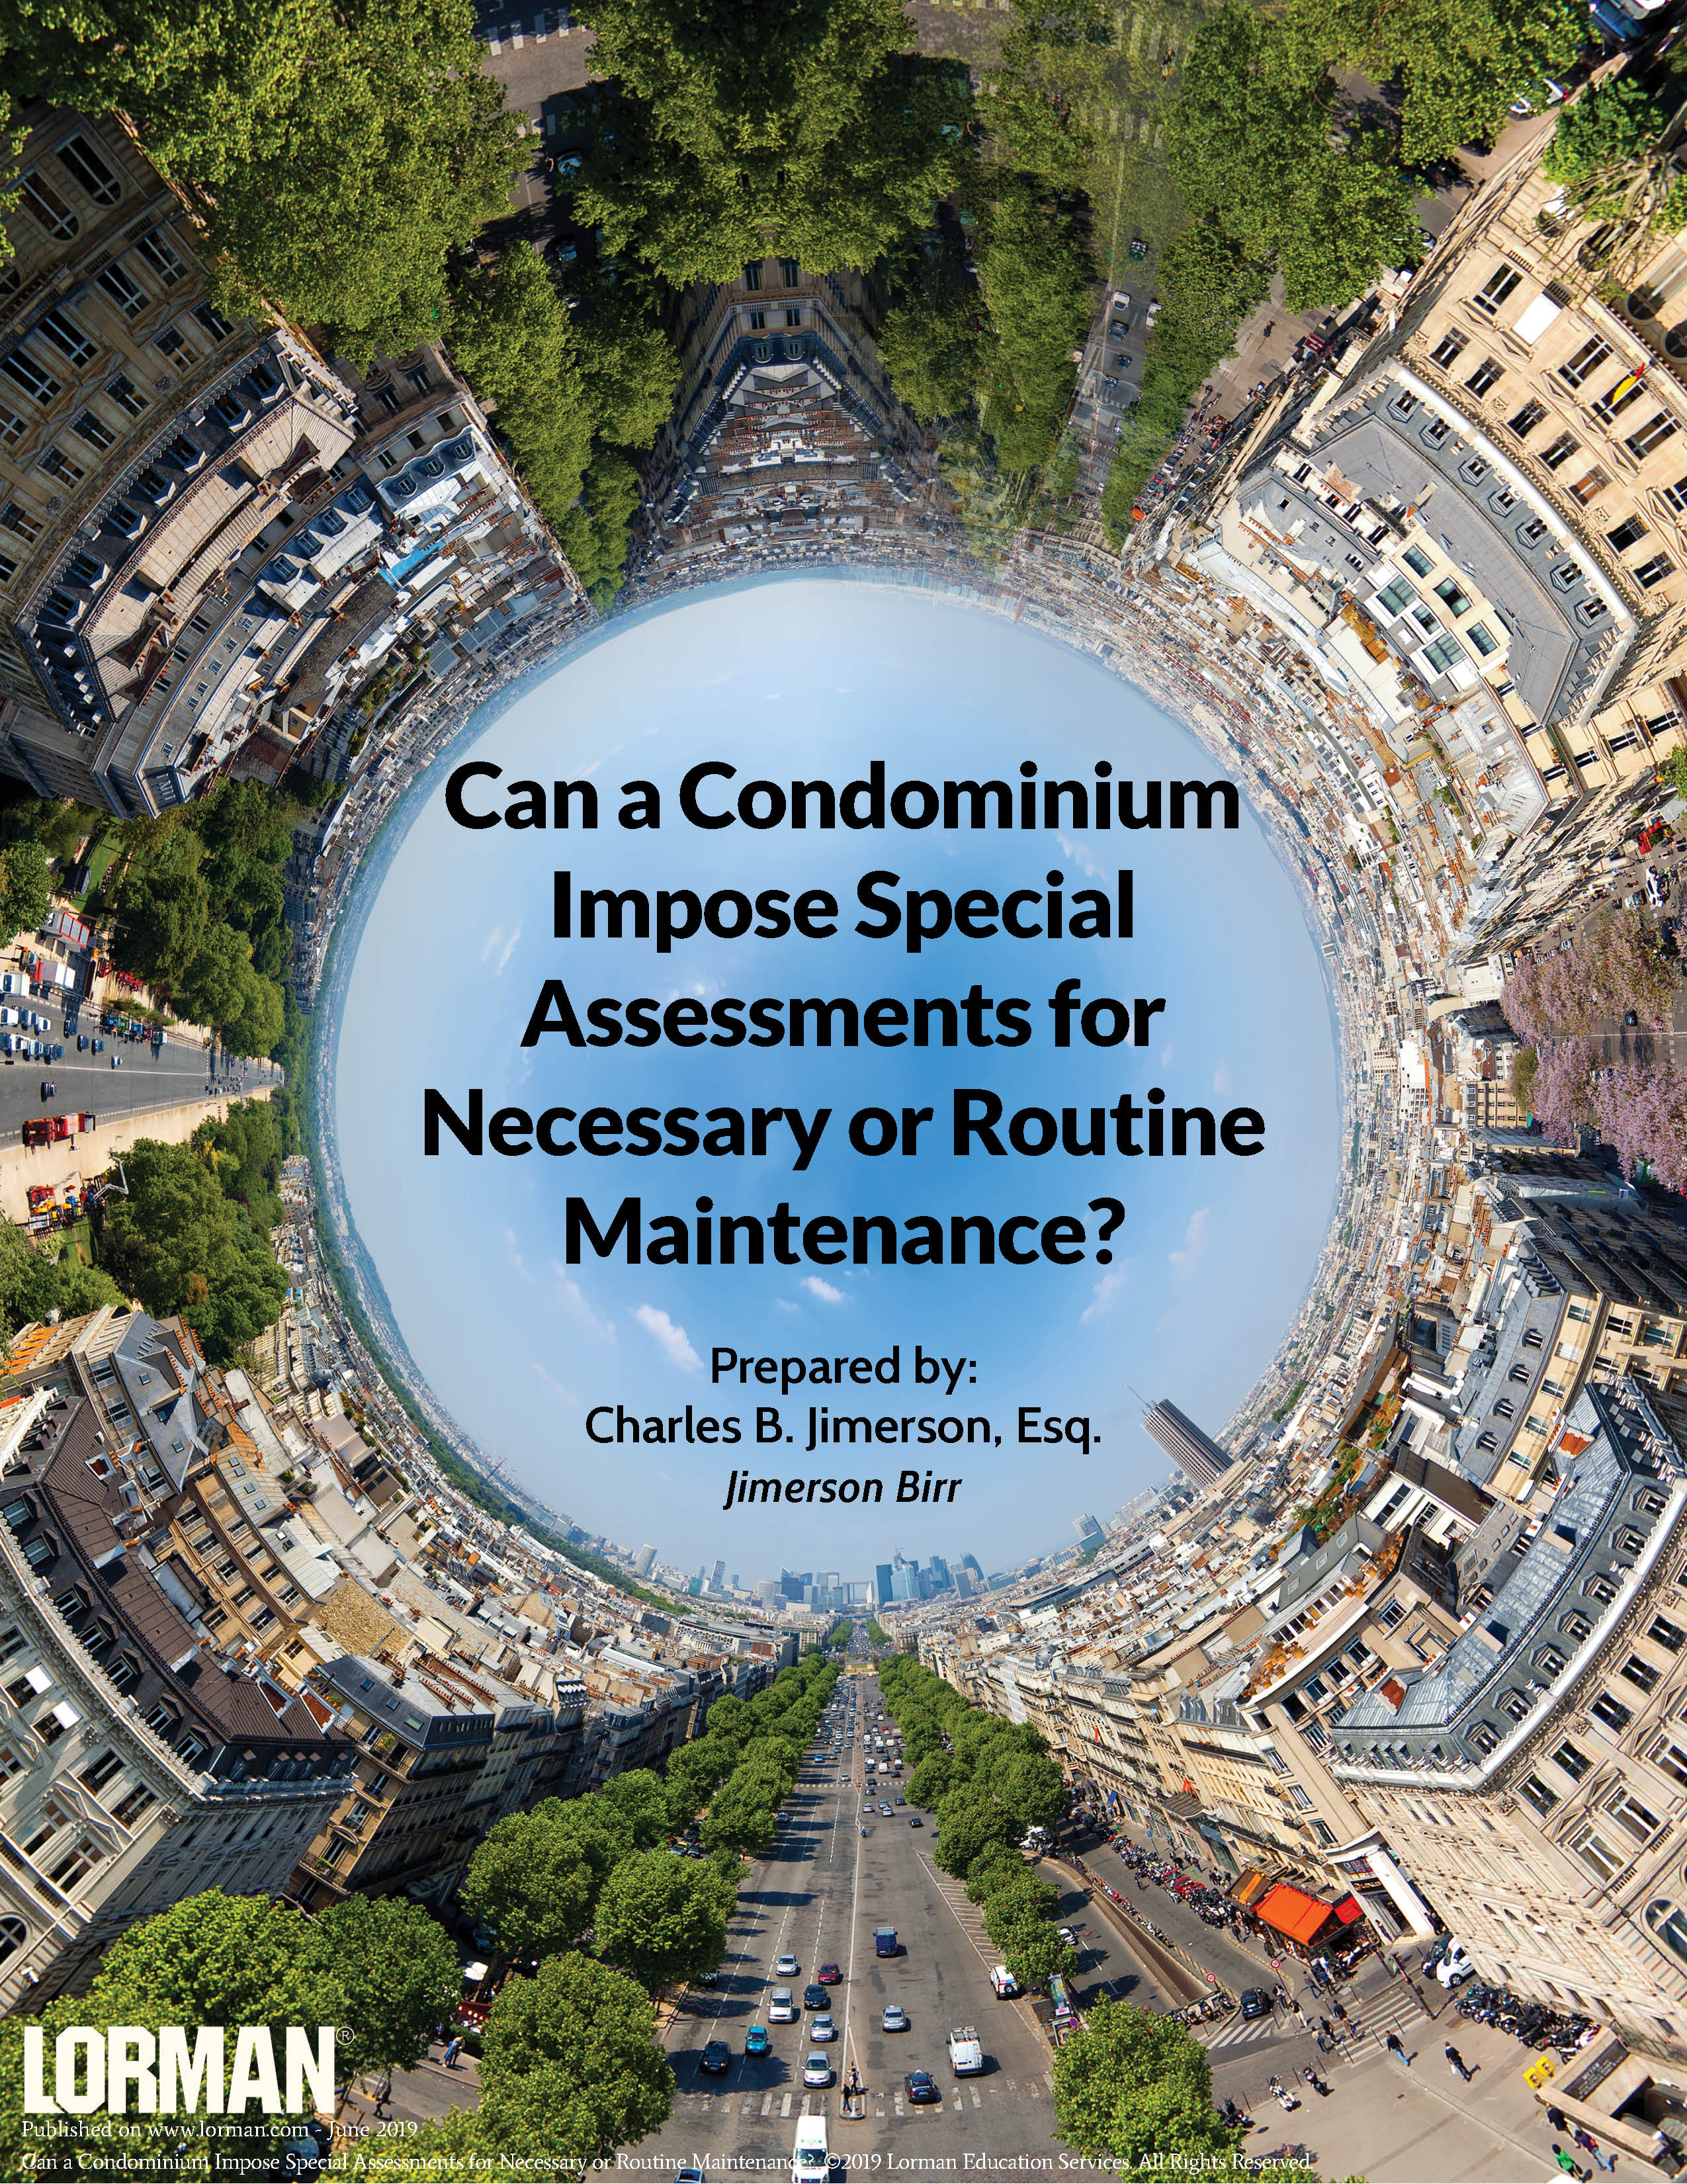 Can a Condominium Impose Special Assessments for Necessary or Routine Maintenance?